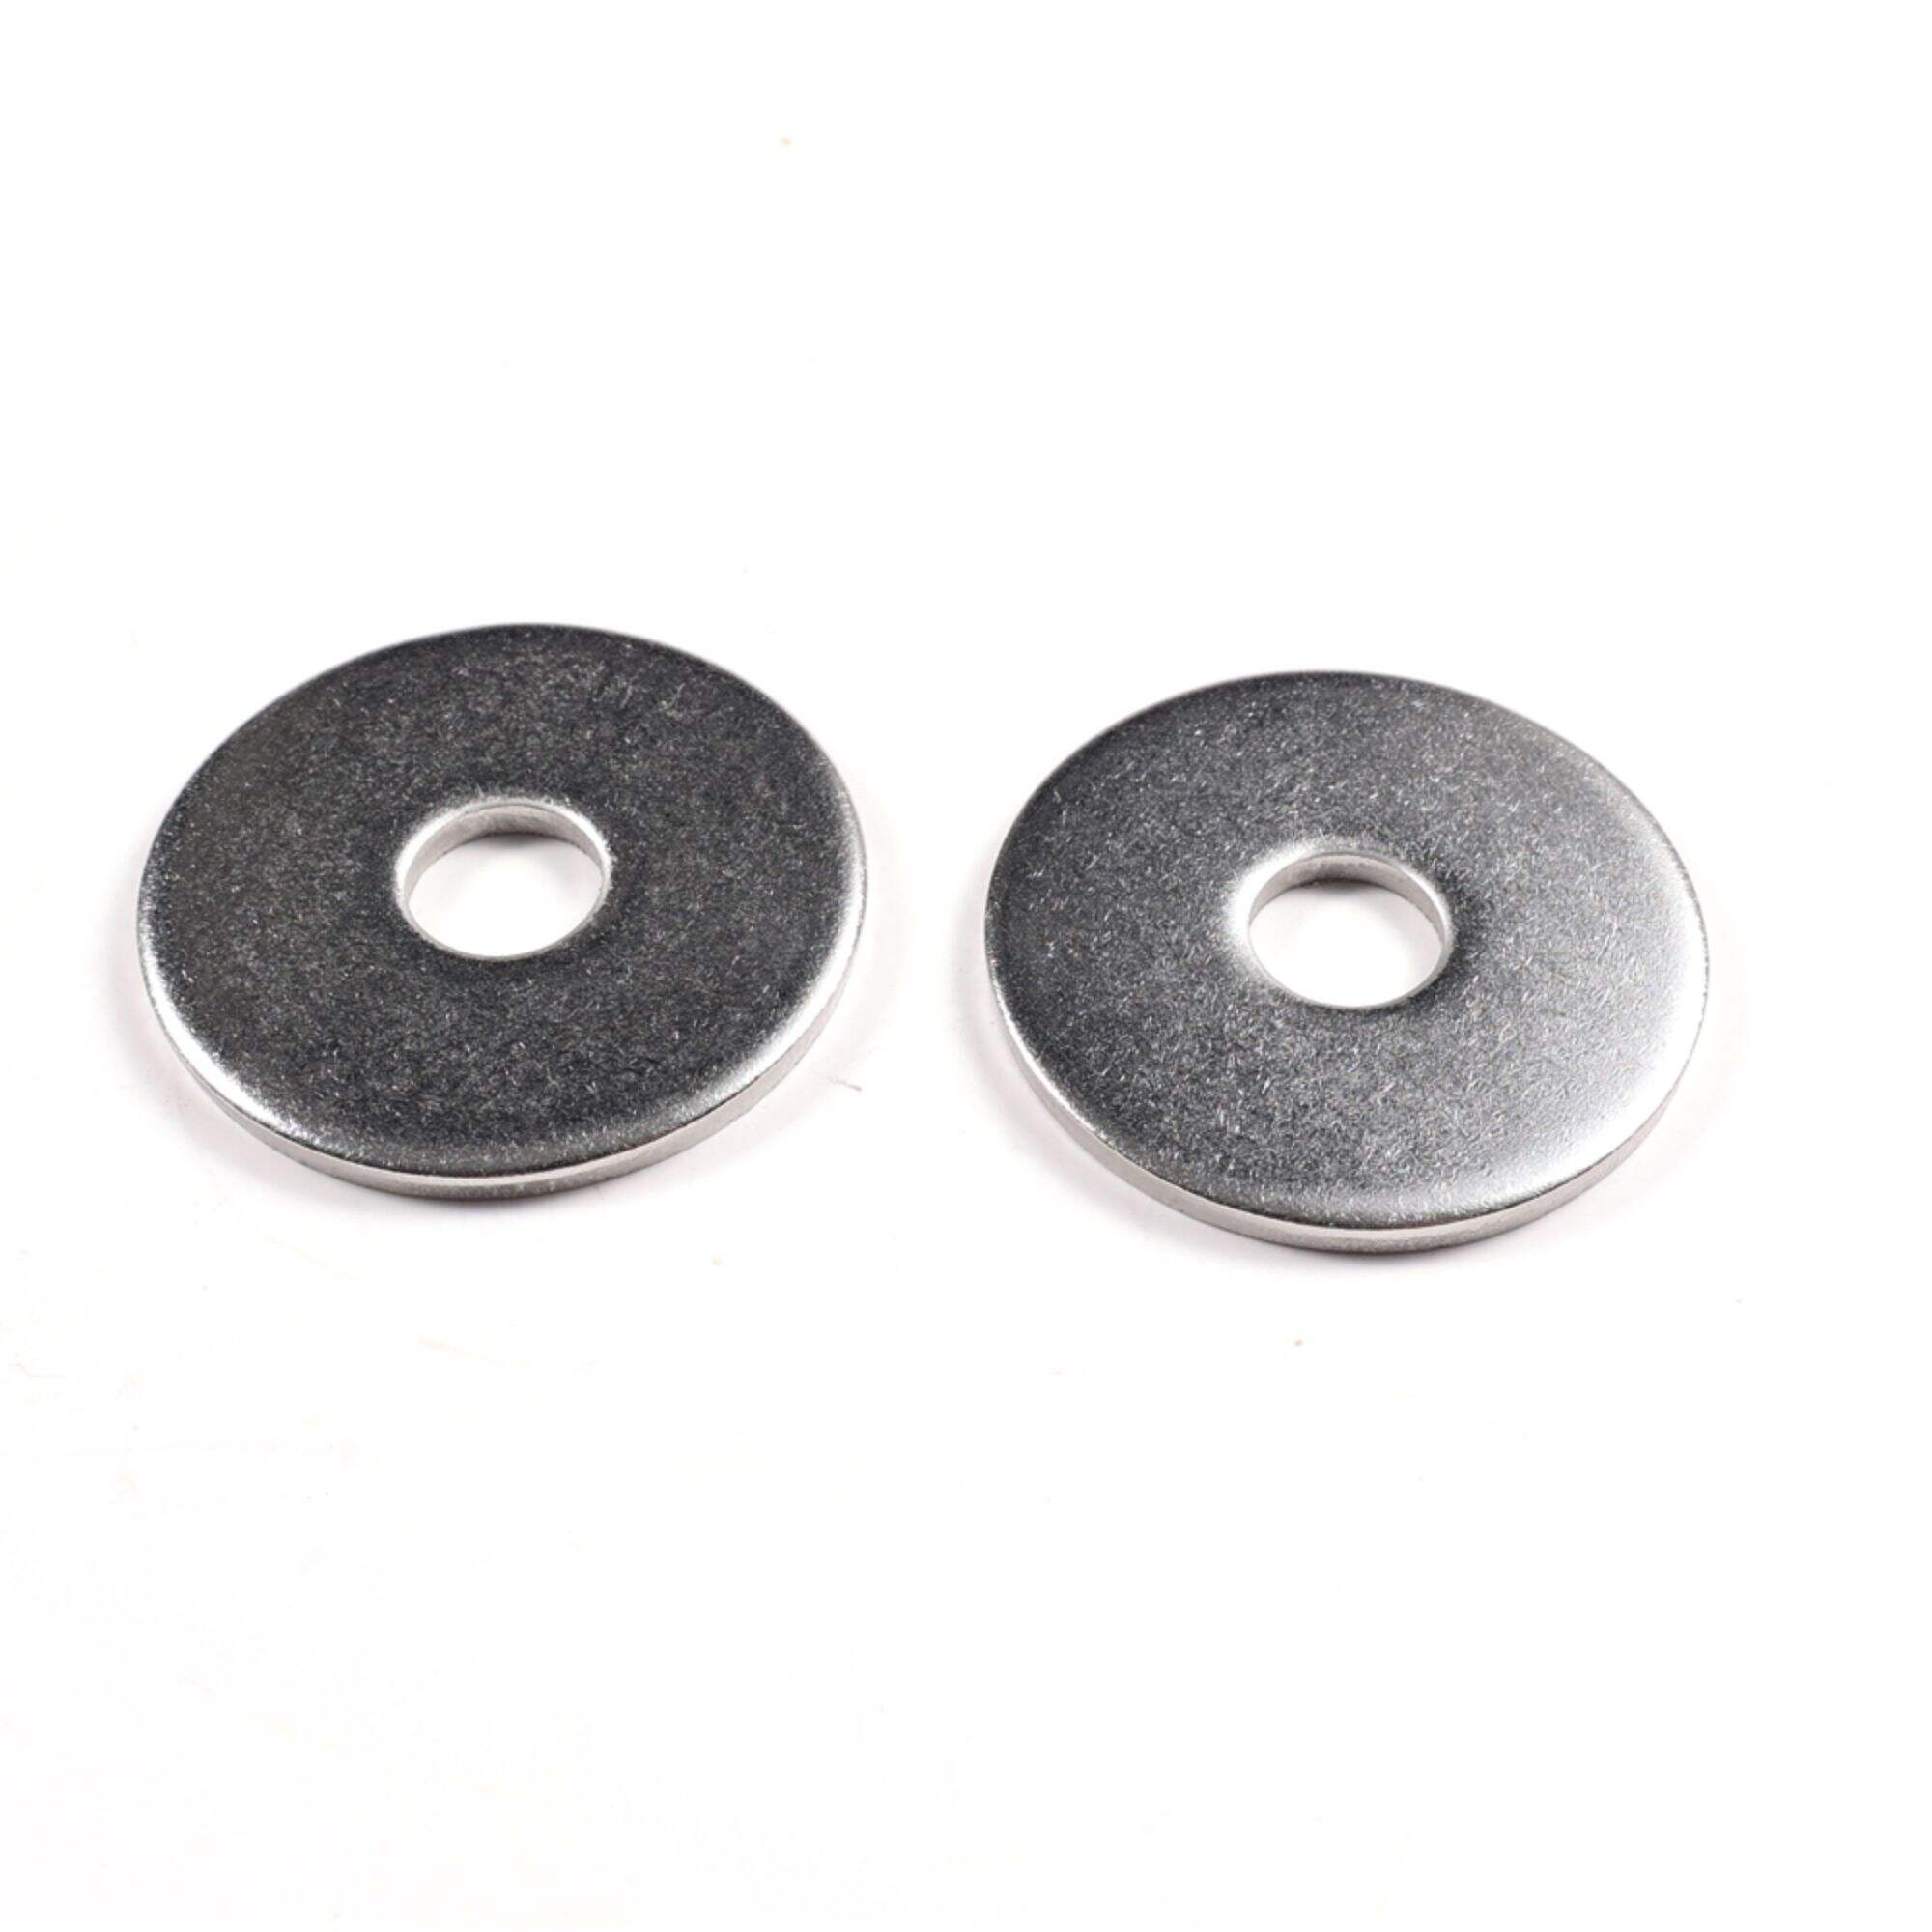 DIN125 Flat Gasket Rings Fasteners Stainless Steel Flat Washer For Bolts Galvanized Plain Washer